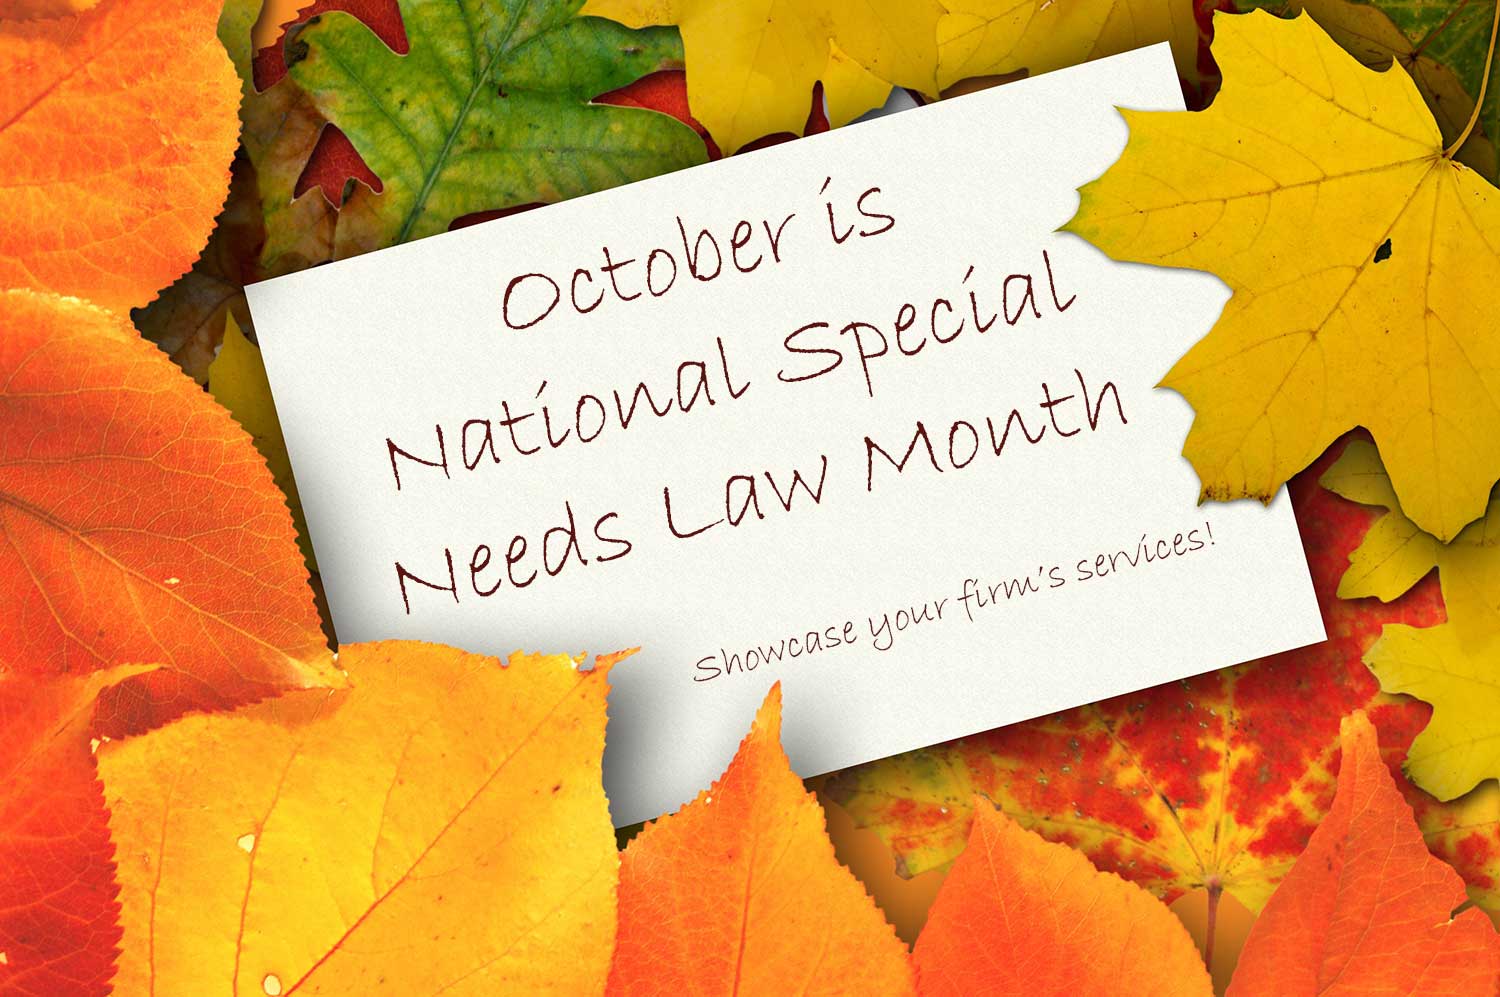 October is National Special Needs Law Month